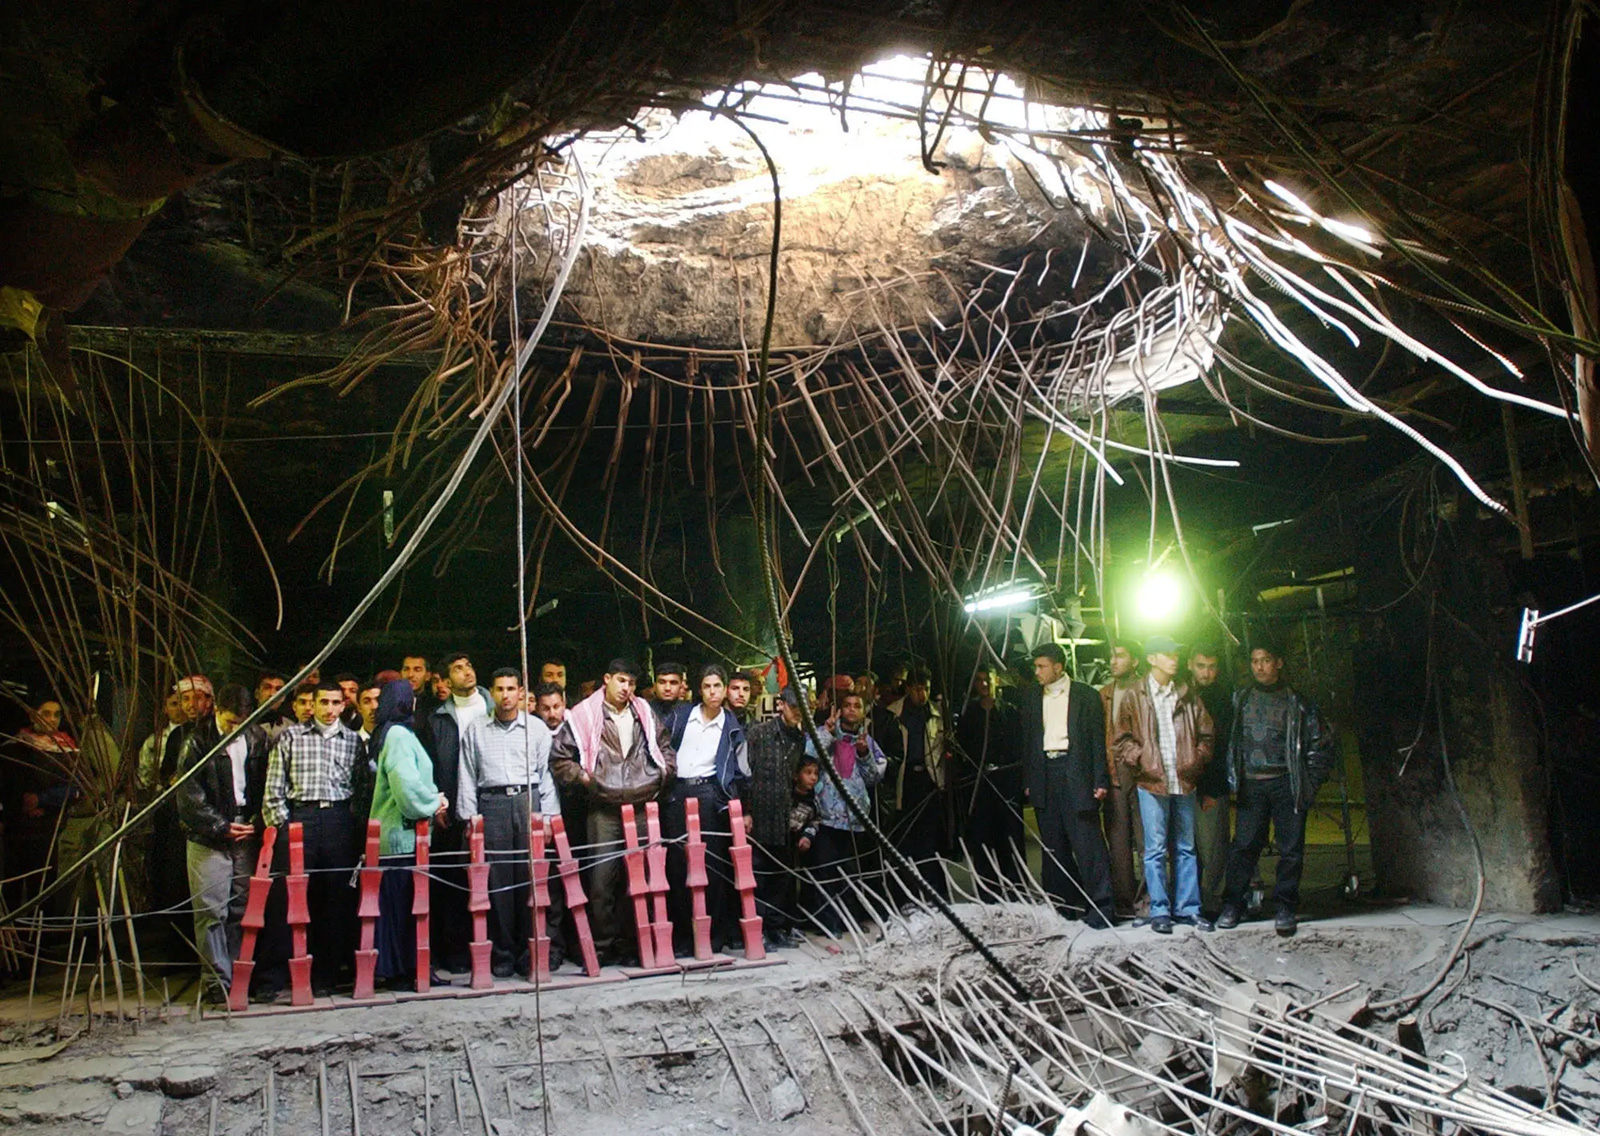 A 2003 photograph of Iraqi students visiting the Amiriyah bomb shelter and the crater made by United States bombs in 1991.